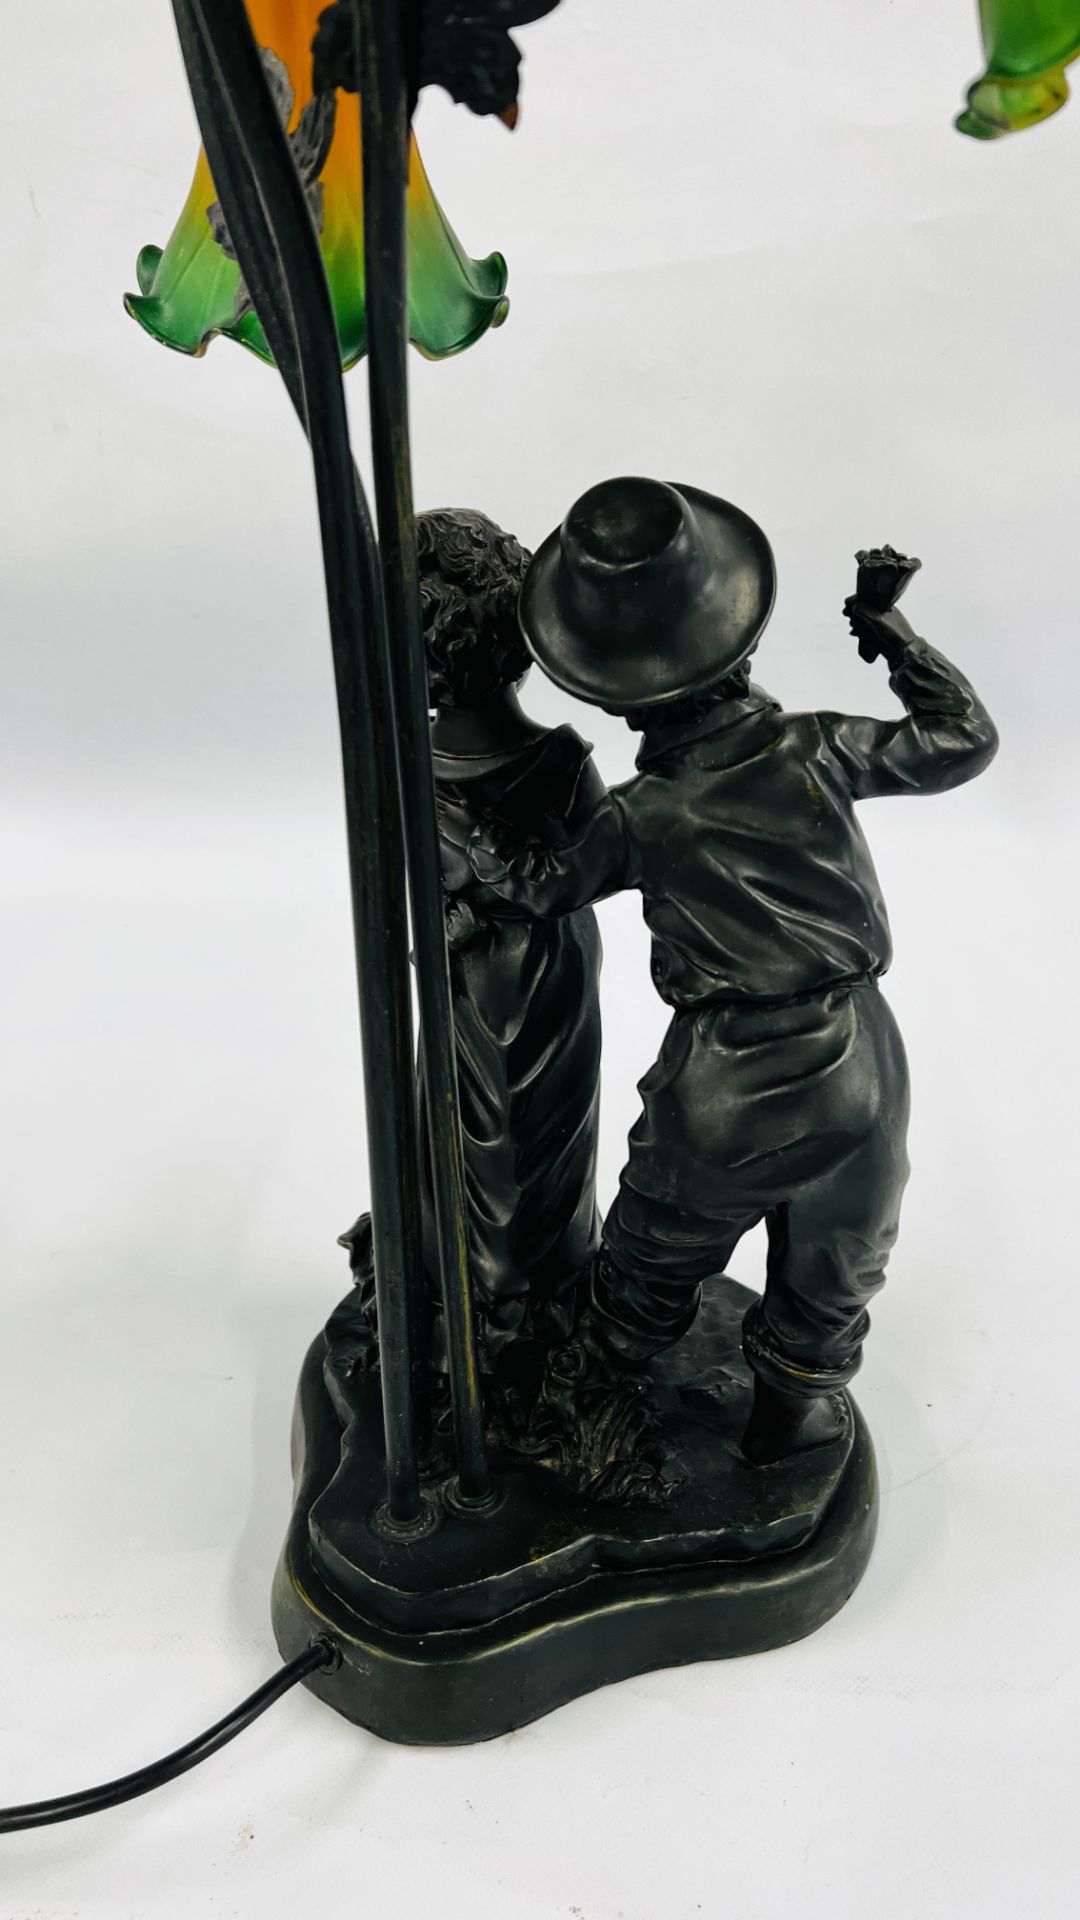 MODERN 3 BRANCH FIGURINE LAMP OF BOY & GIRL 65CM - SOLD AS SEEN. - Image 7 of 7